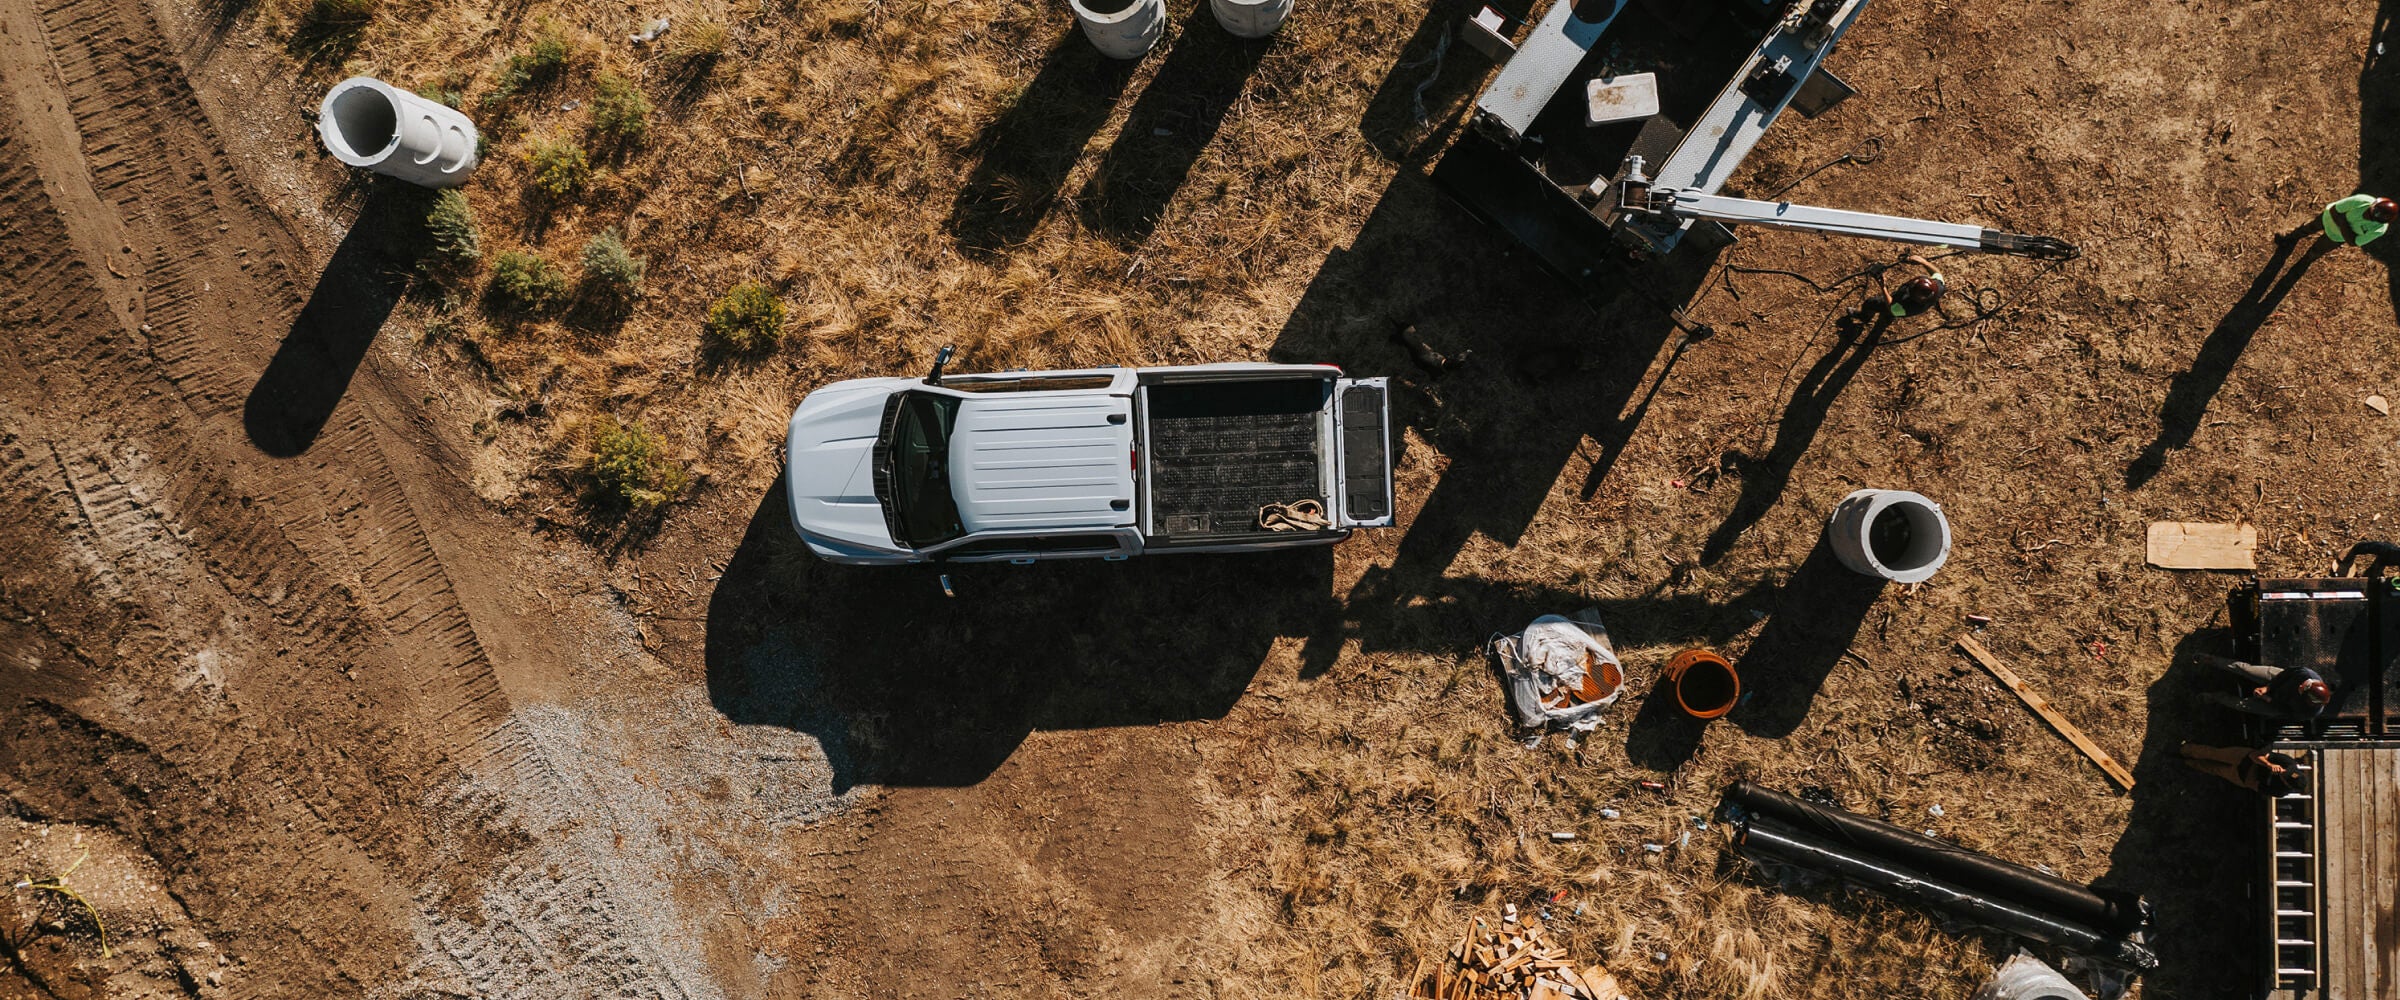 Overhead view of trucks at a construction site